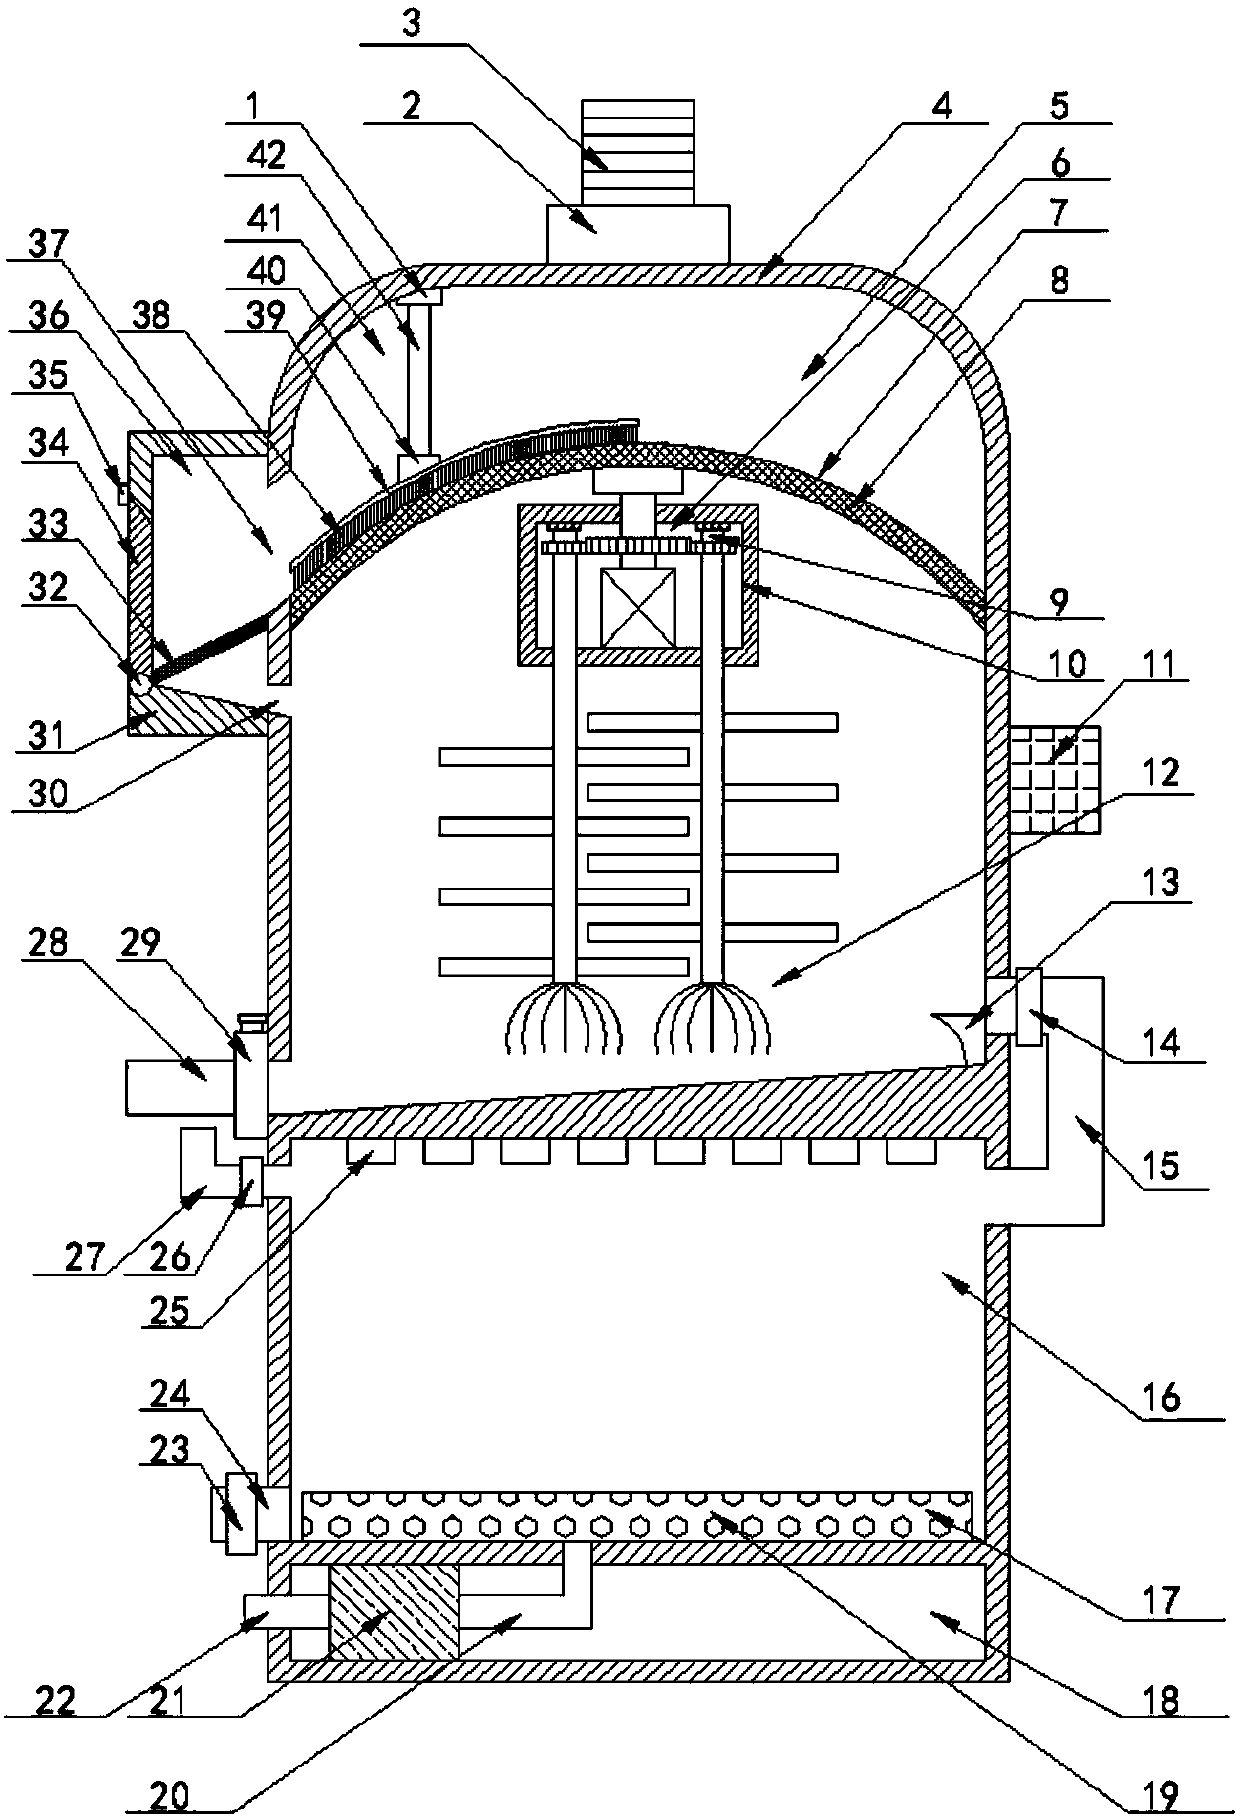 Novel filtering and sterilizing apparatus for domestic sewage